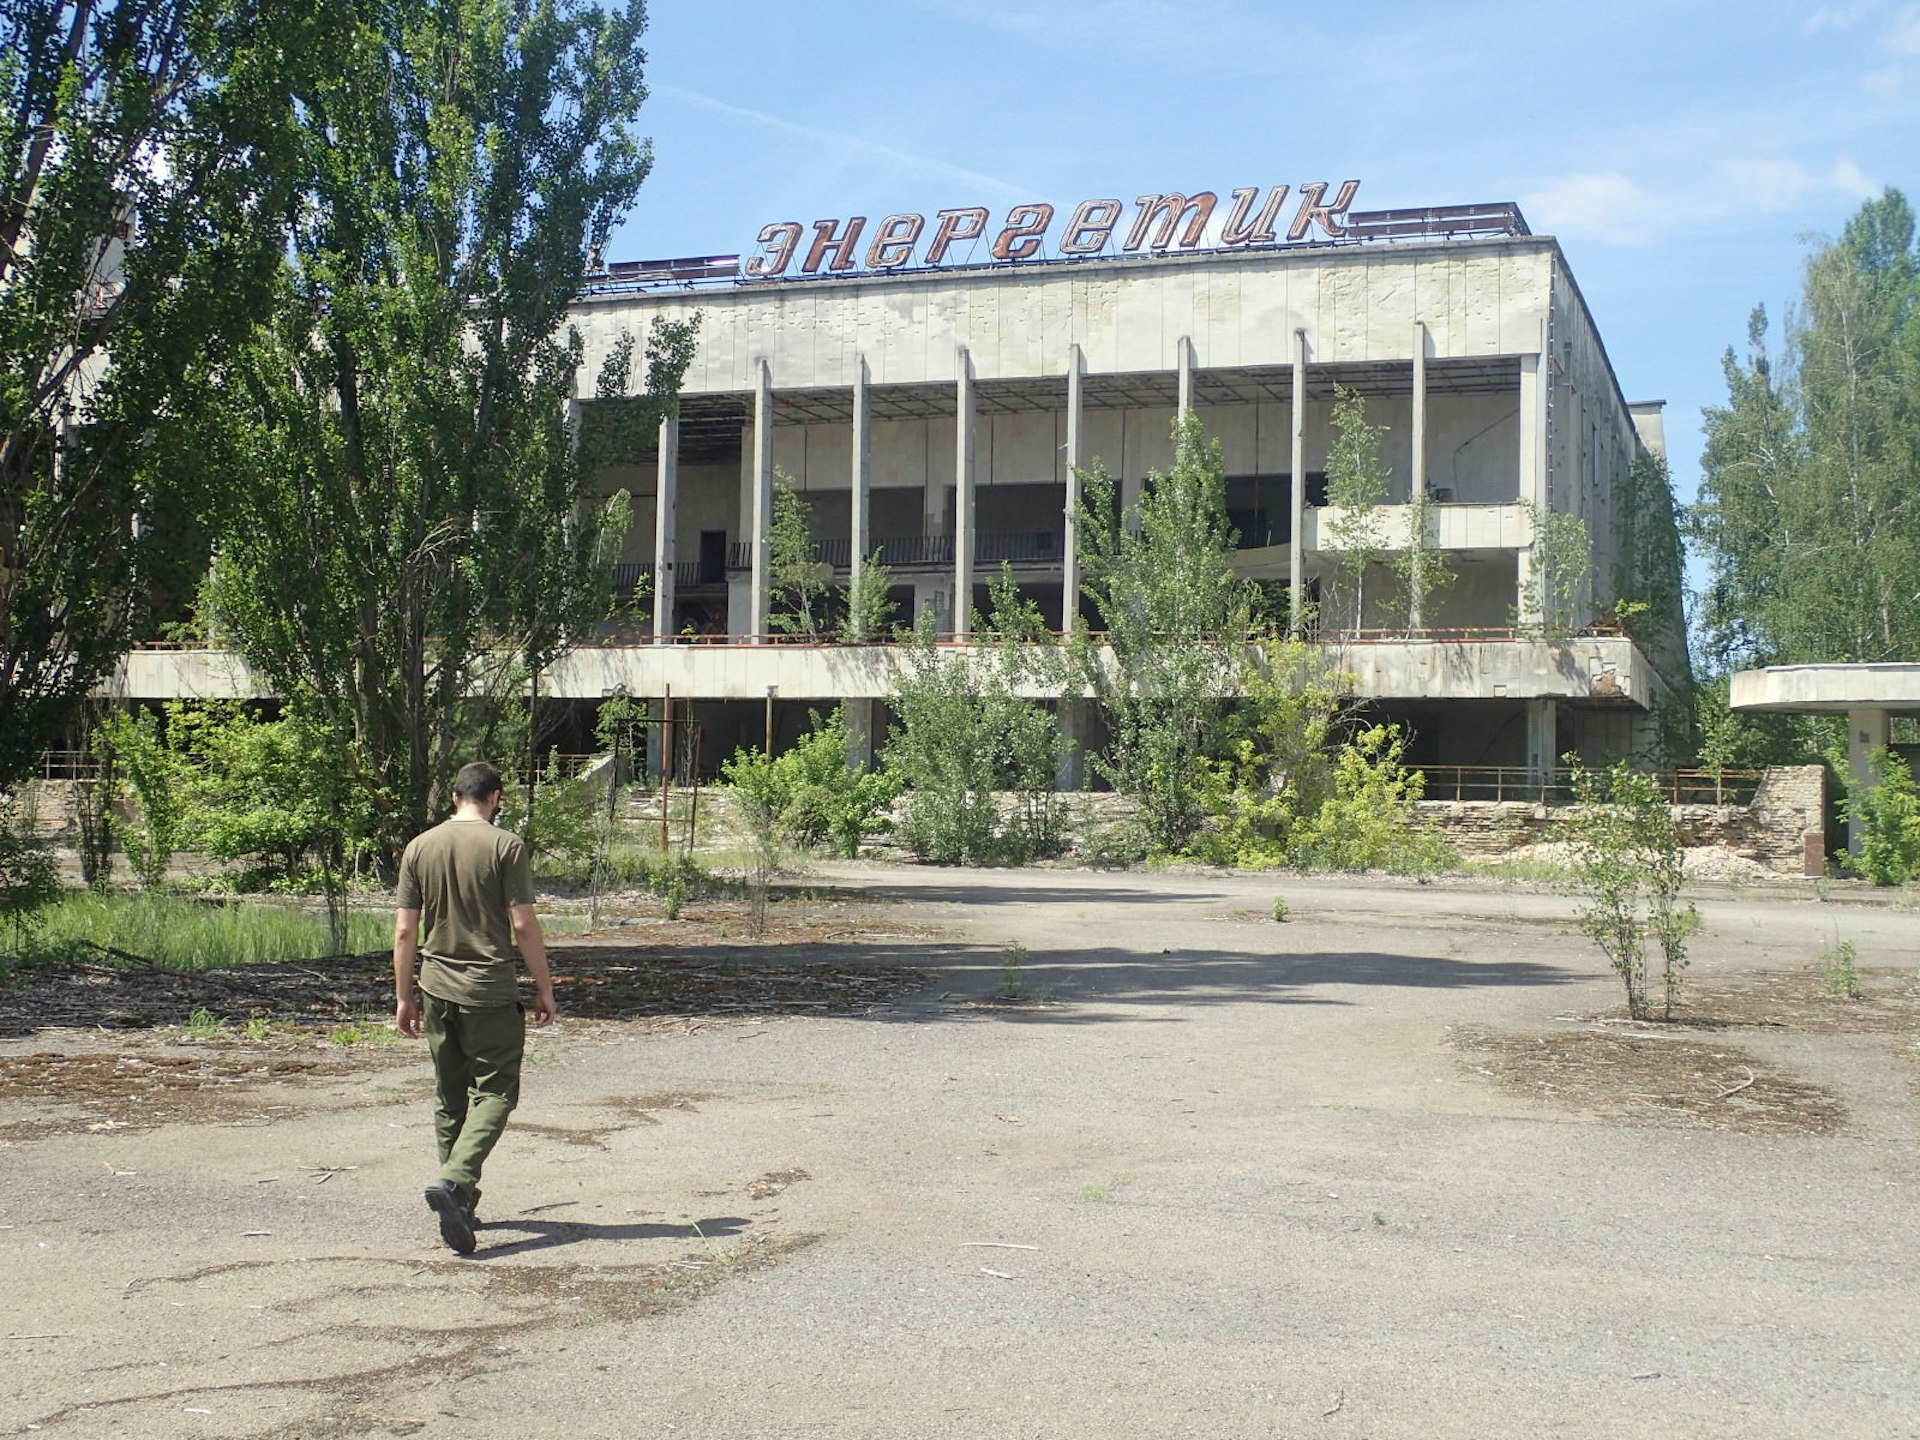 A guide walks across tarmac towards the derelict Palace of Culture in Pripyat; tress are growing in front of and within the pillared concrete structure, which has a large sign in Ukrainian script on its roof. 